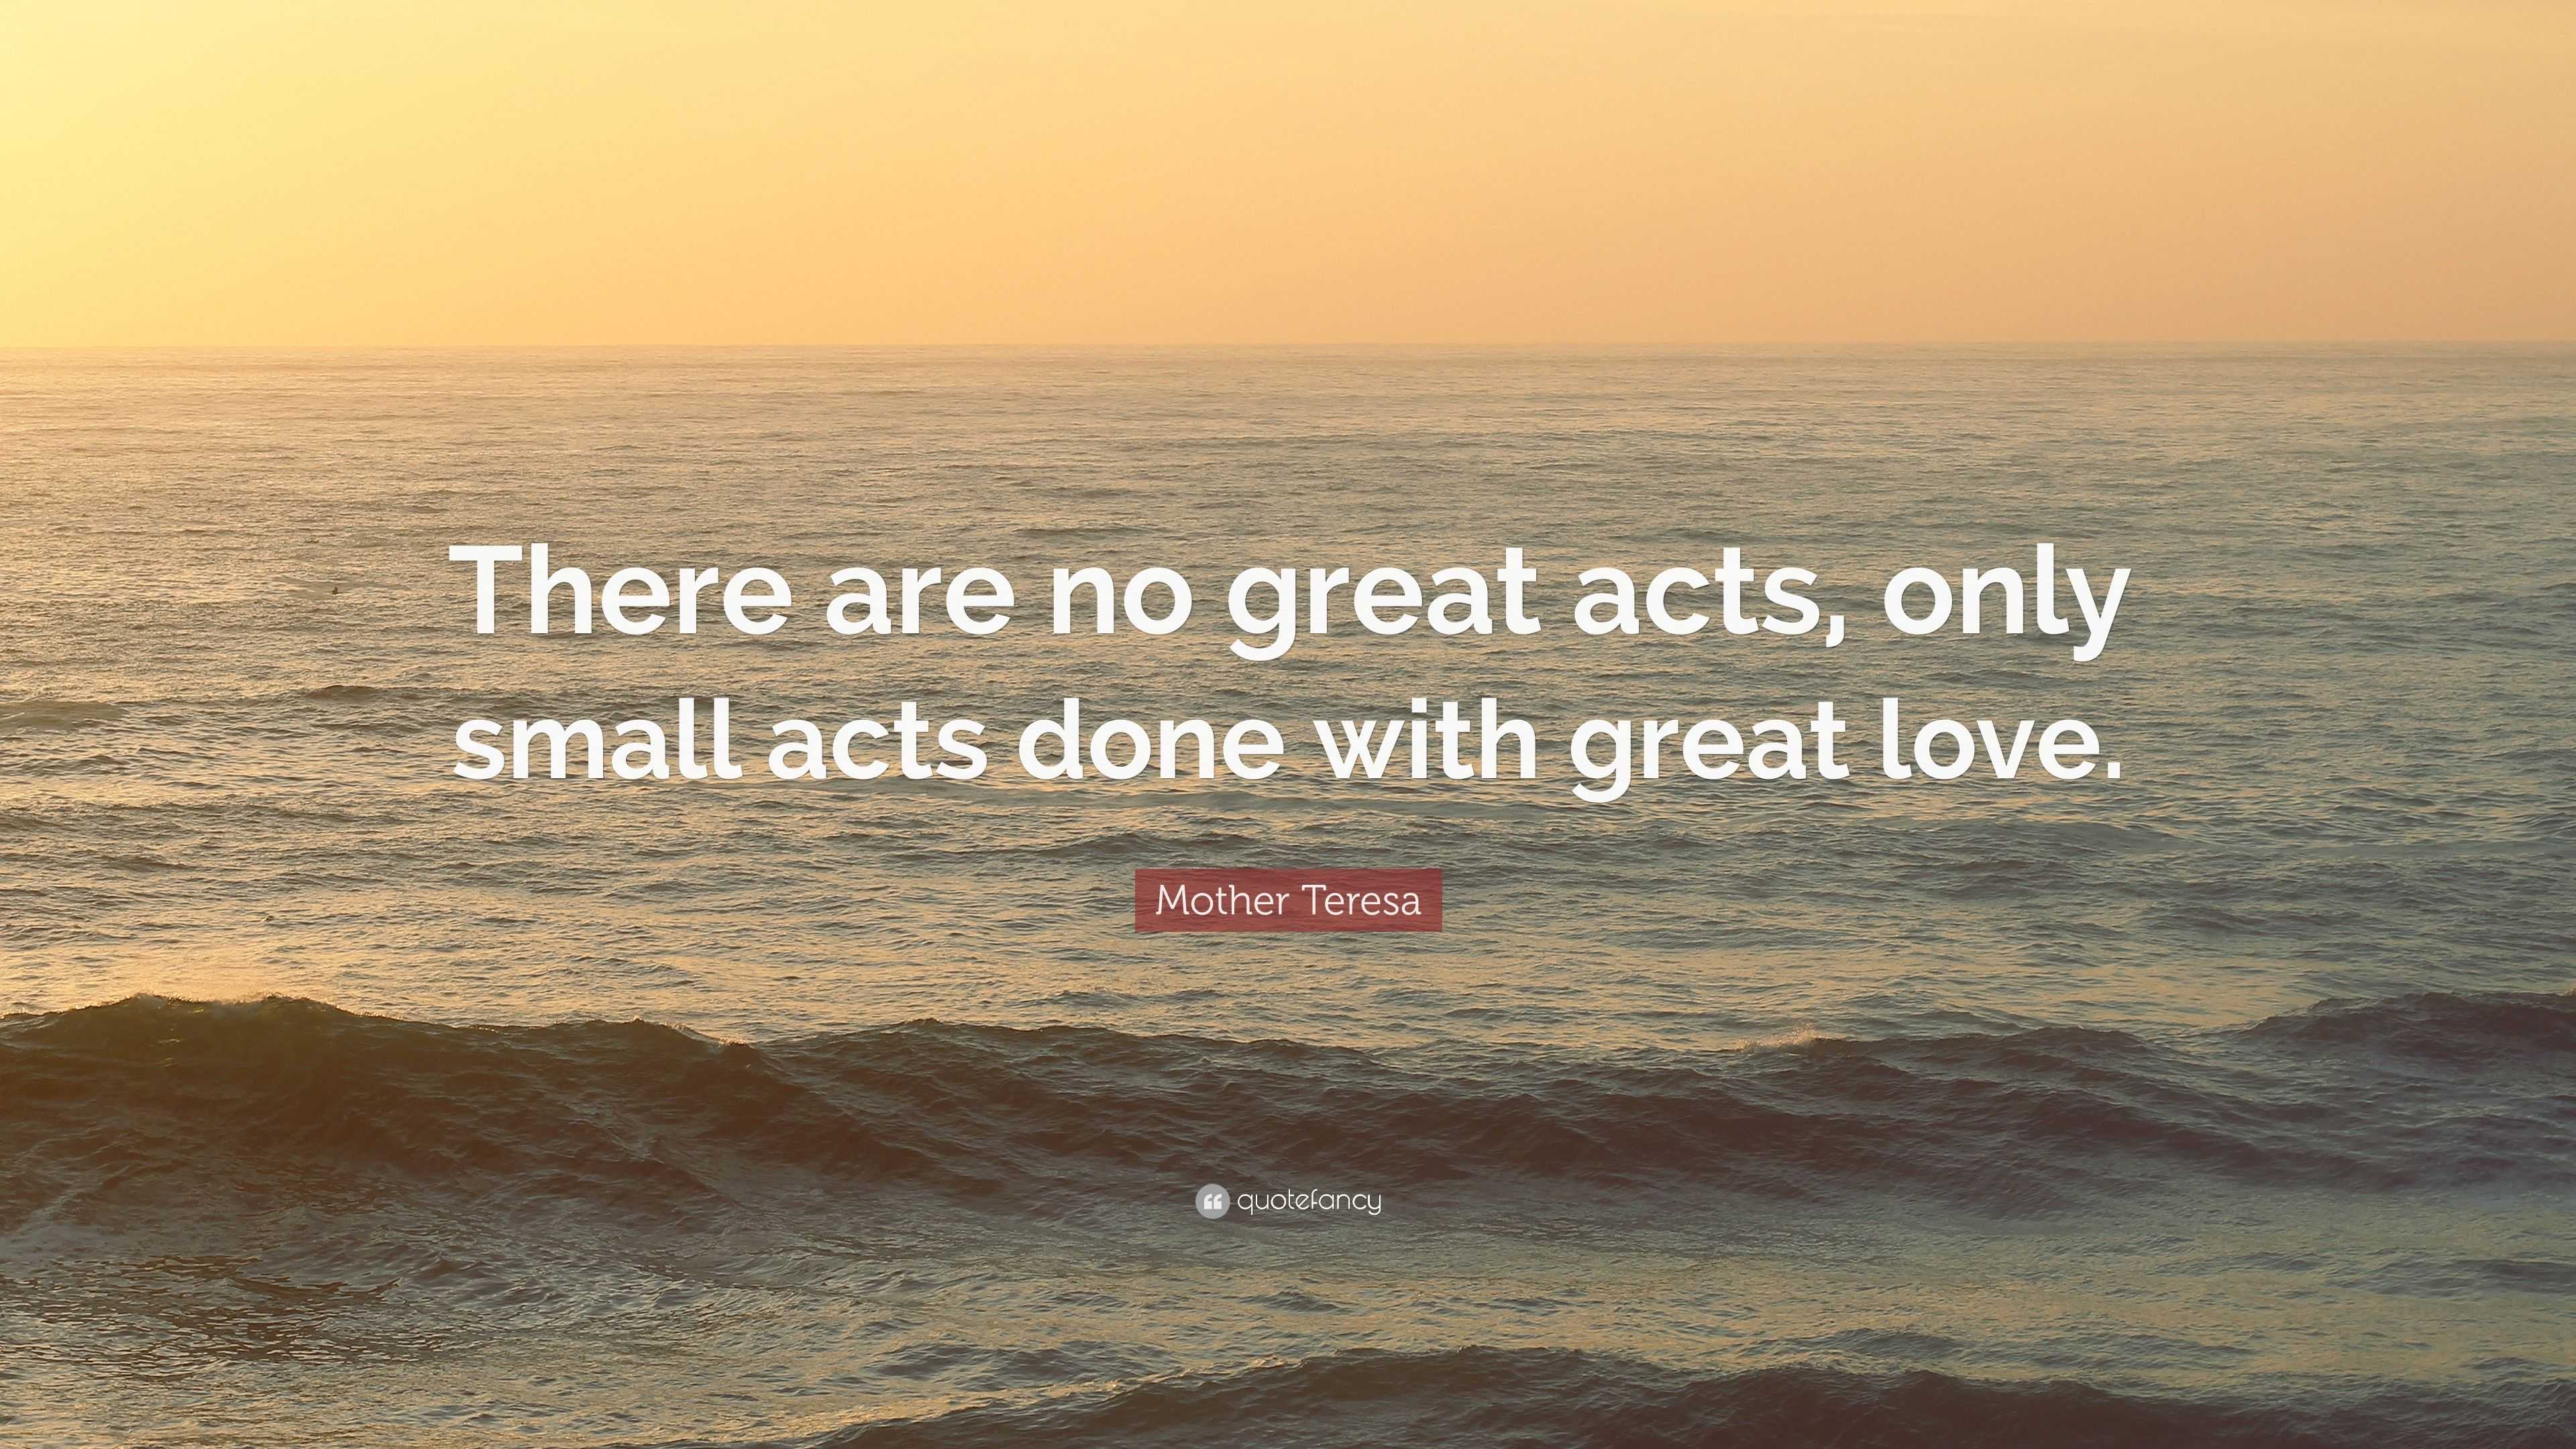 Mother Teresa Quote “There are no great acts only small acts done with